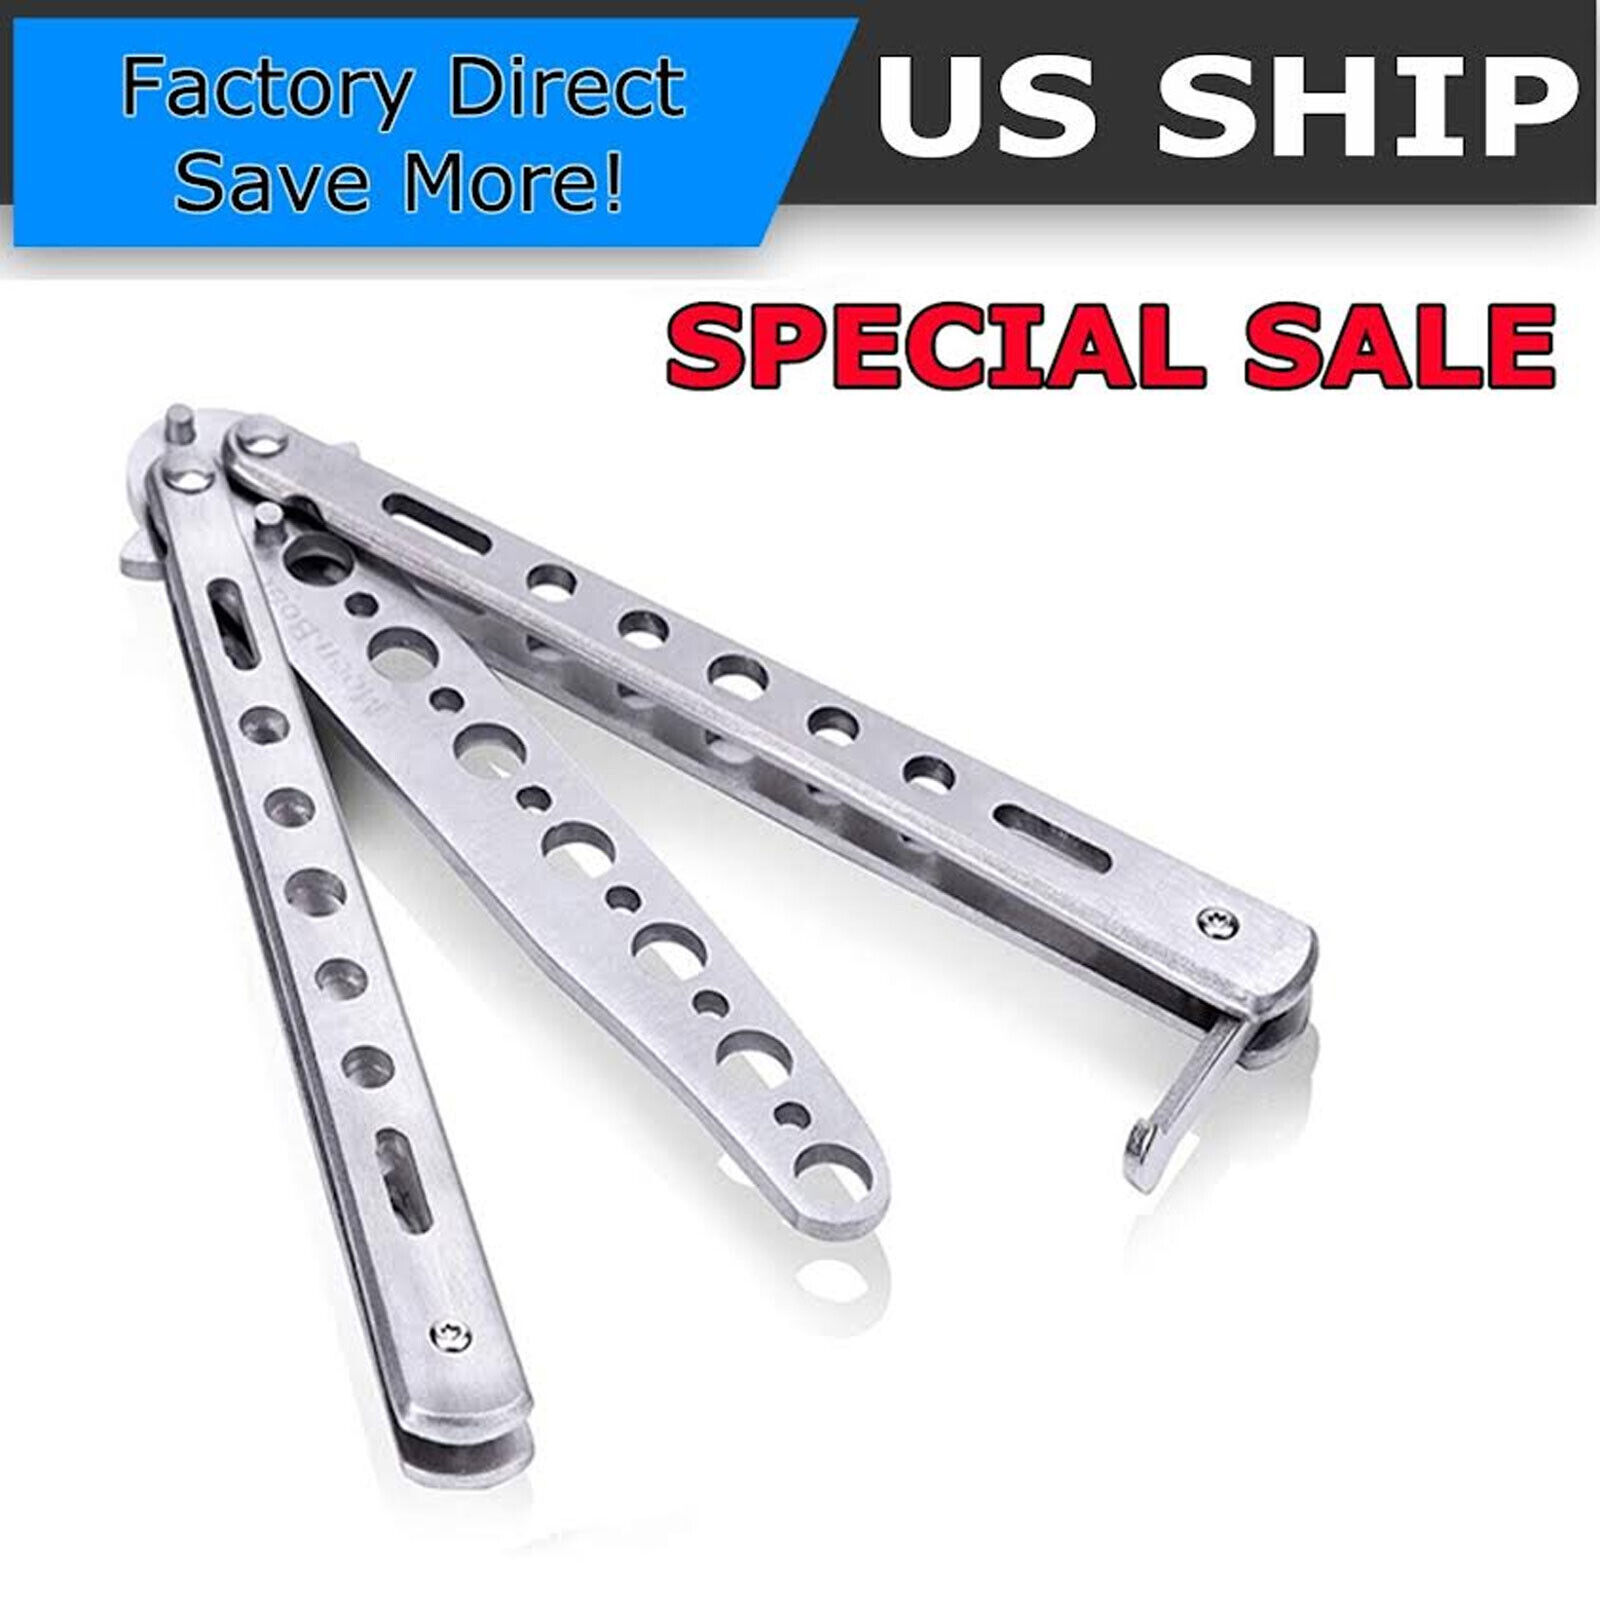 Butterfly Trainer Knife Practice Balisong Dull Training Tool Metal Black Silver